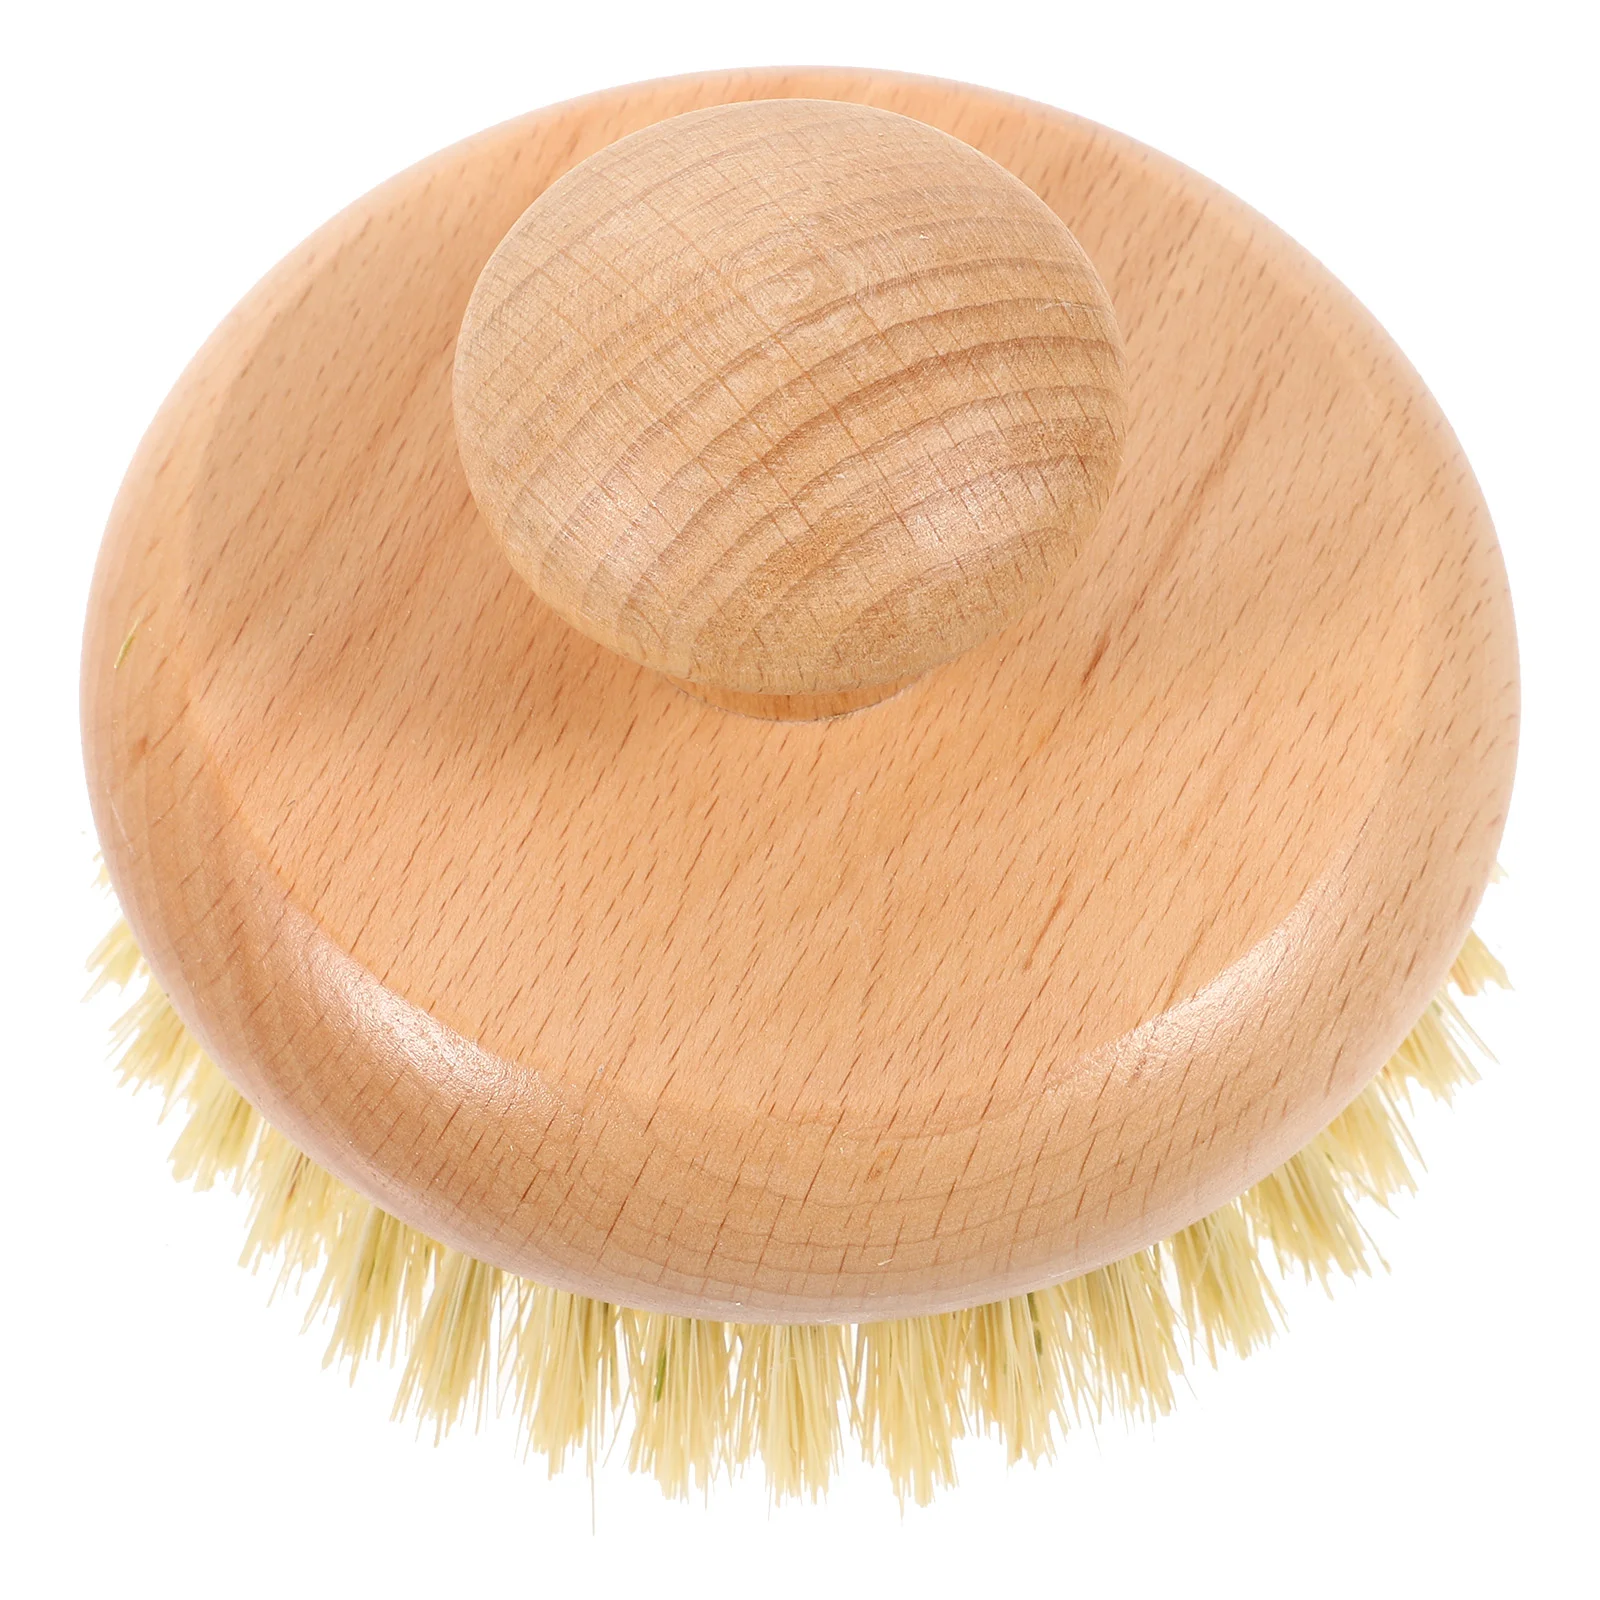 

Bath Brush Round Cleaning Scrubber for Back Massage Body Handle Sisal Bathing Practical Shower